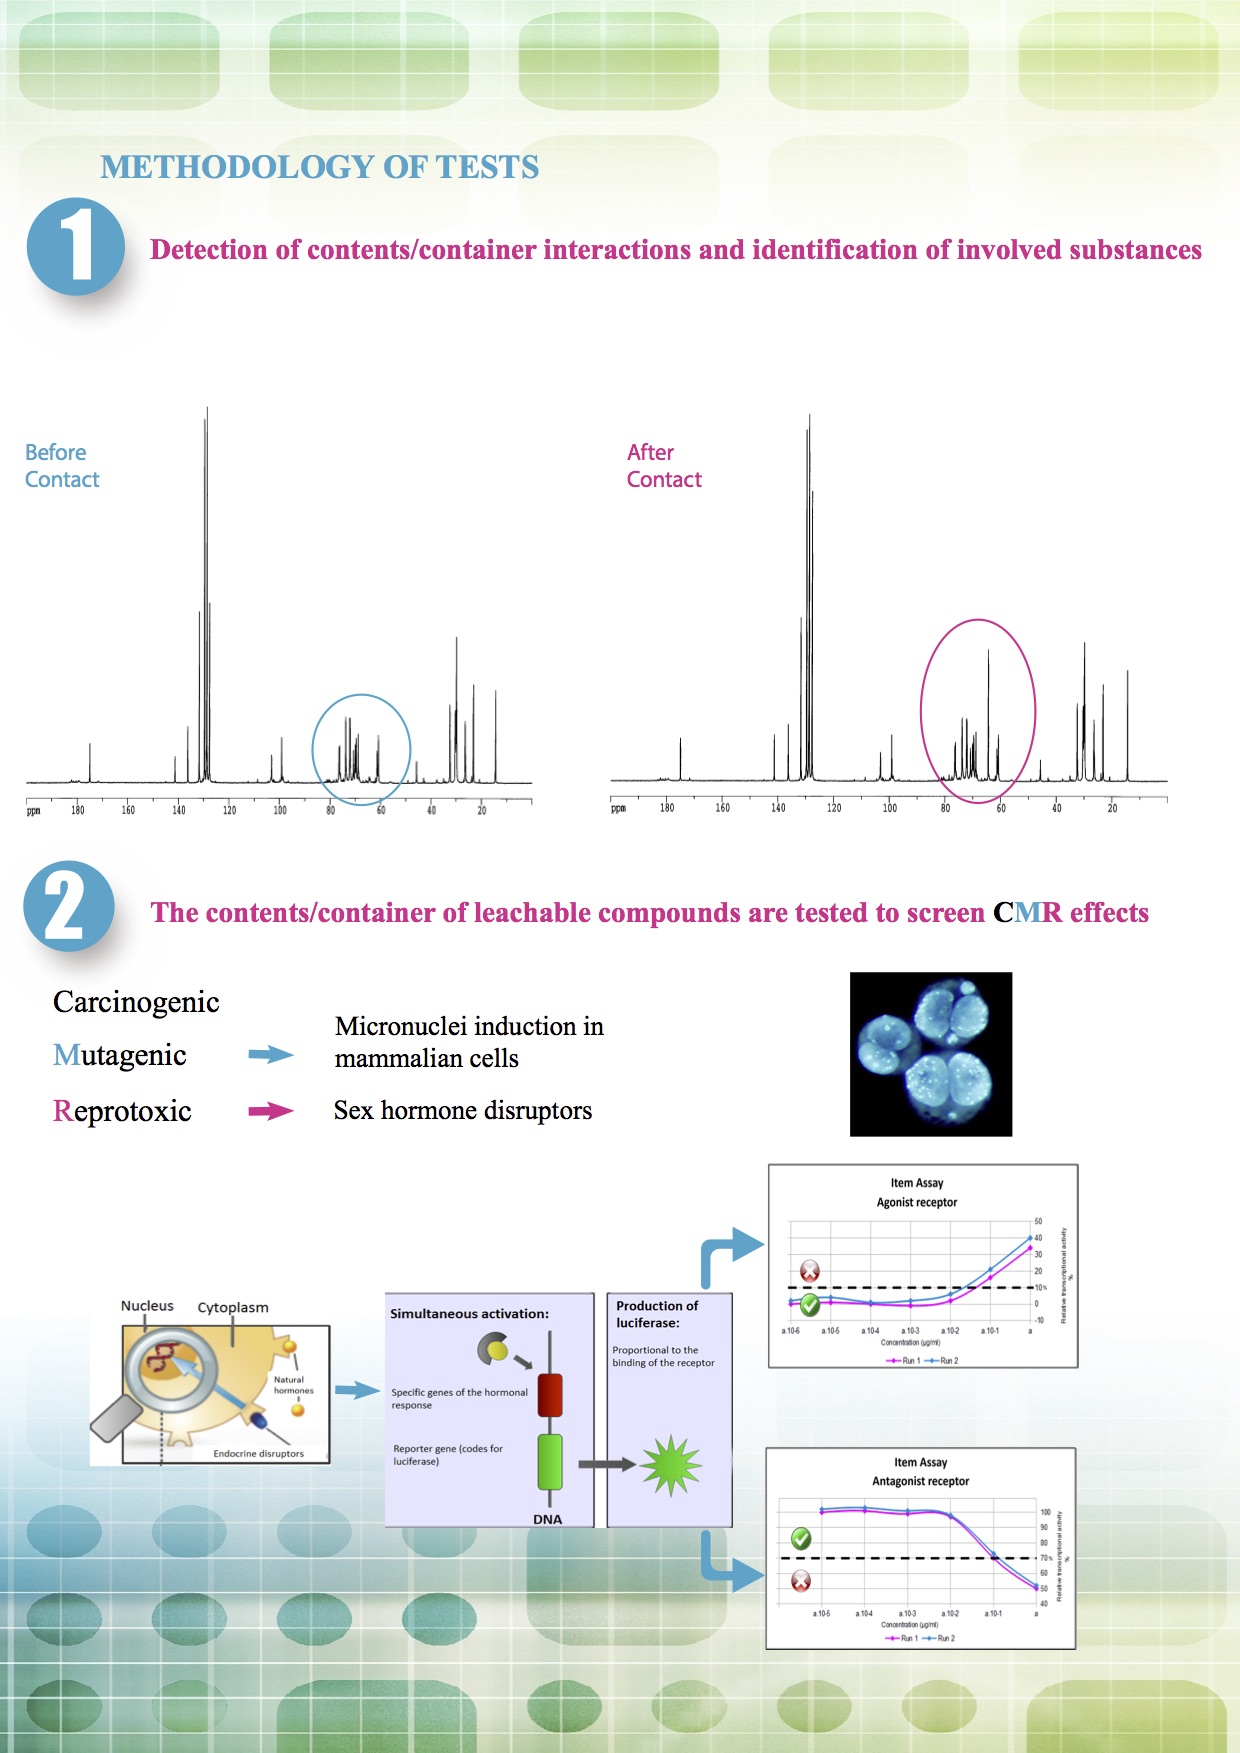 brochure about detection of contains and containers interaction and toxicity testing : a unique combinaison of analytical and biological expertise